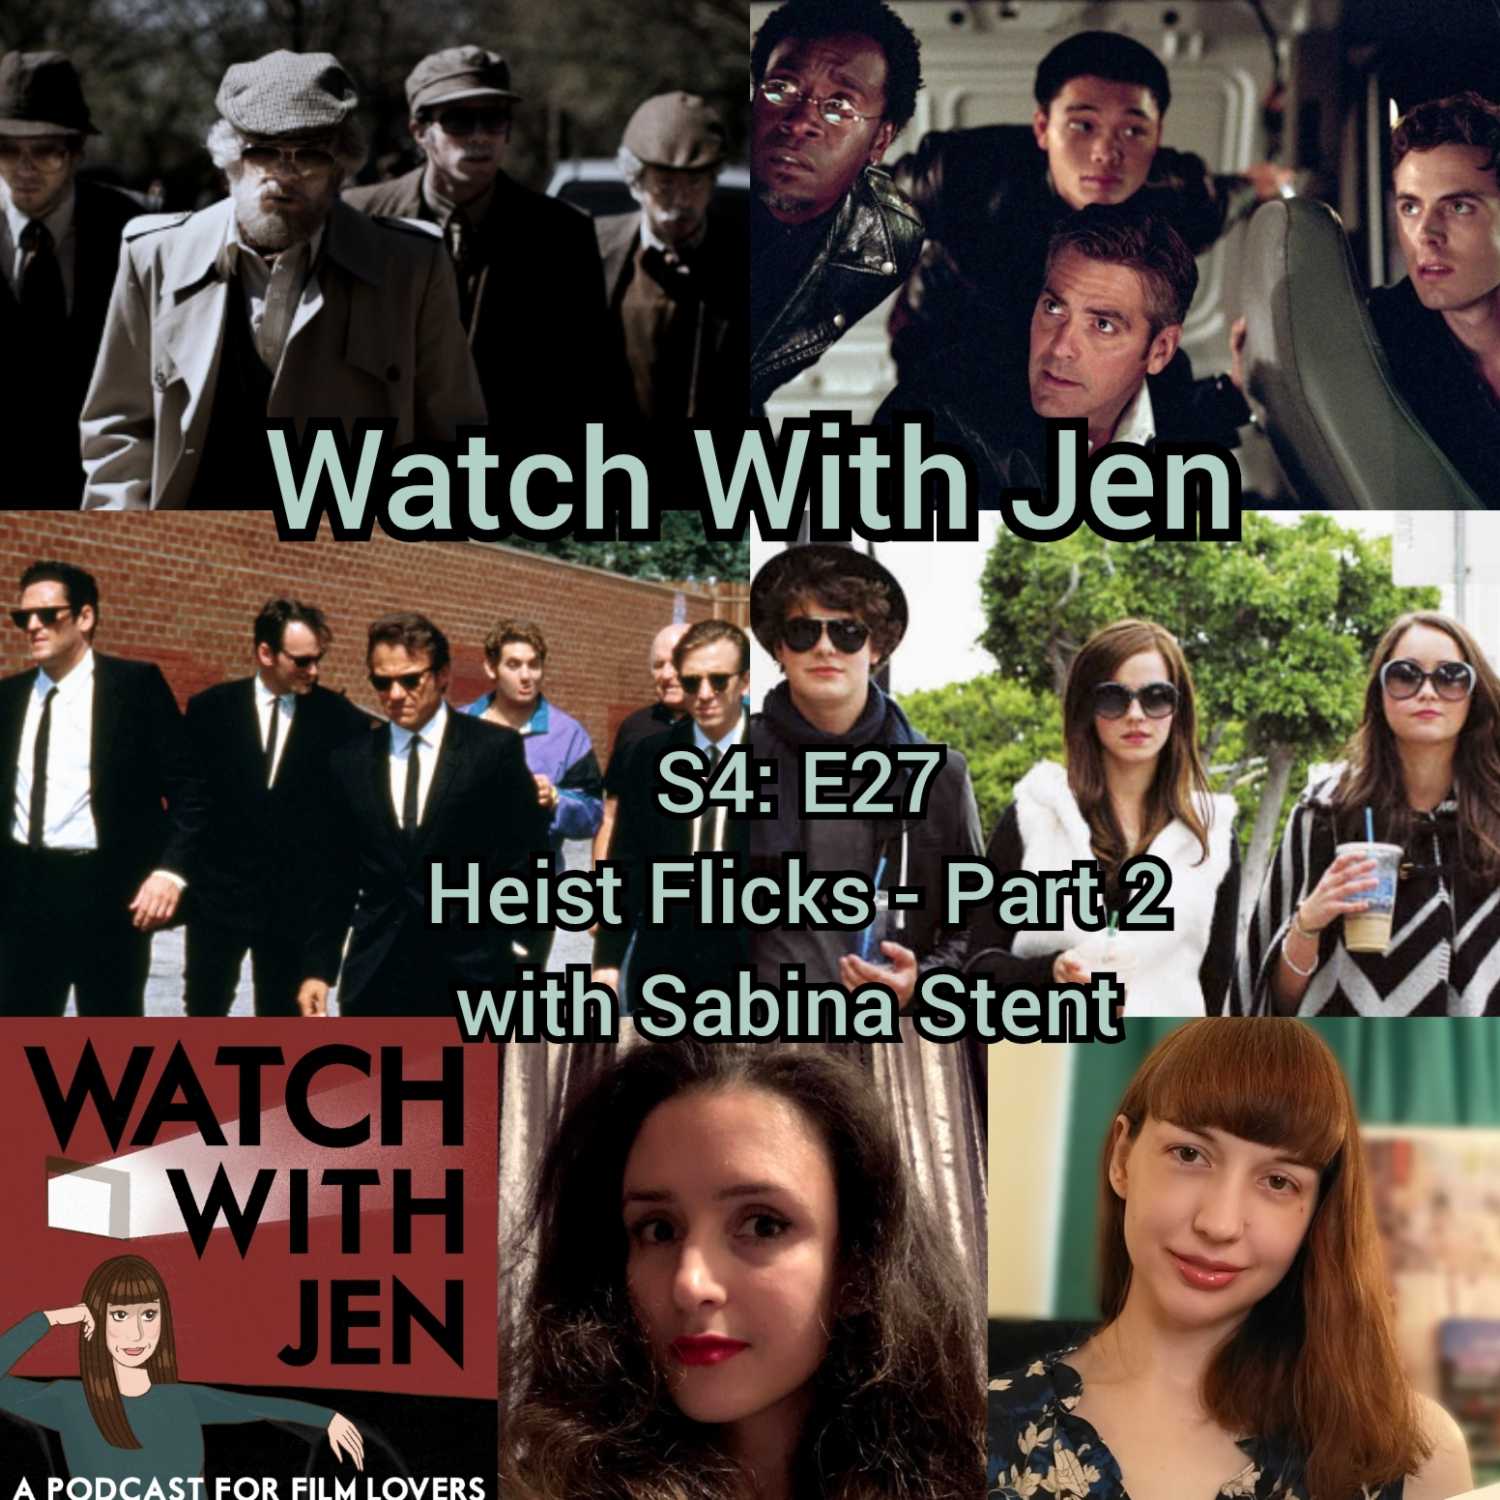 Watch With Jen - S4: E27 - Heist Flicks - Part 2 with Sabina Stent